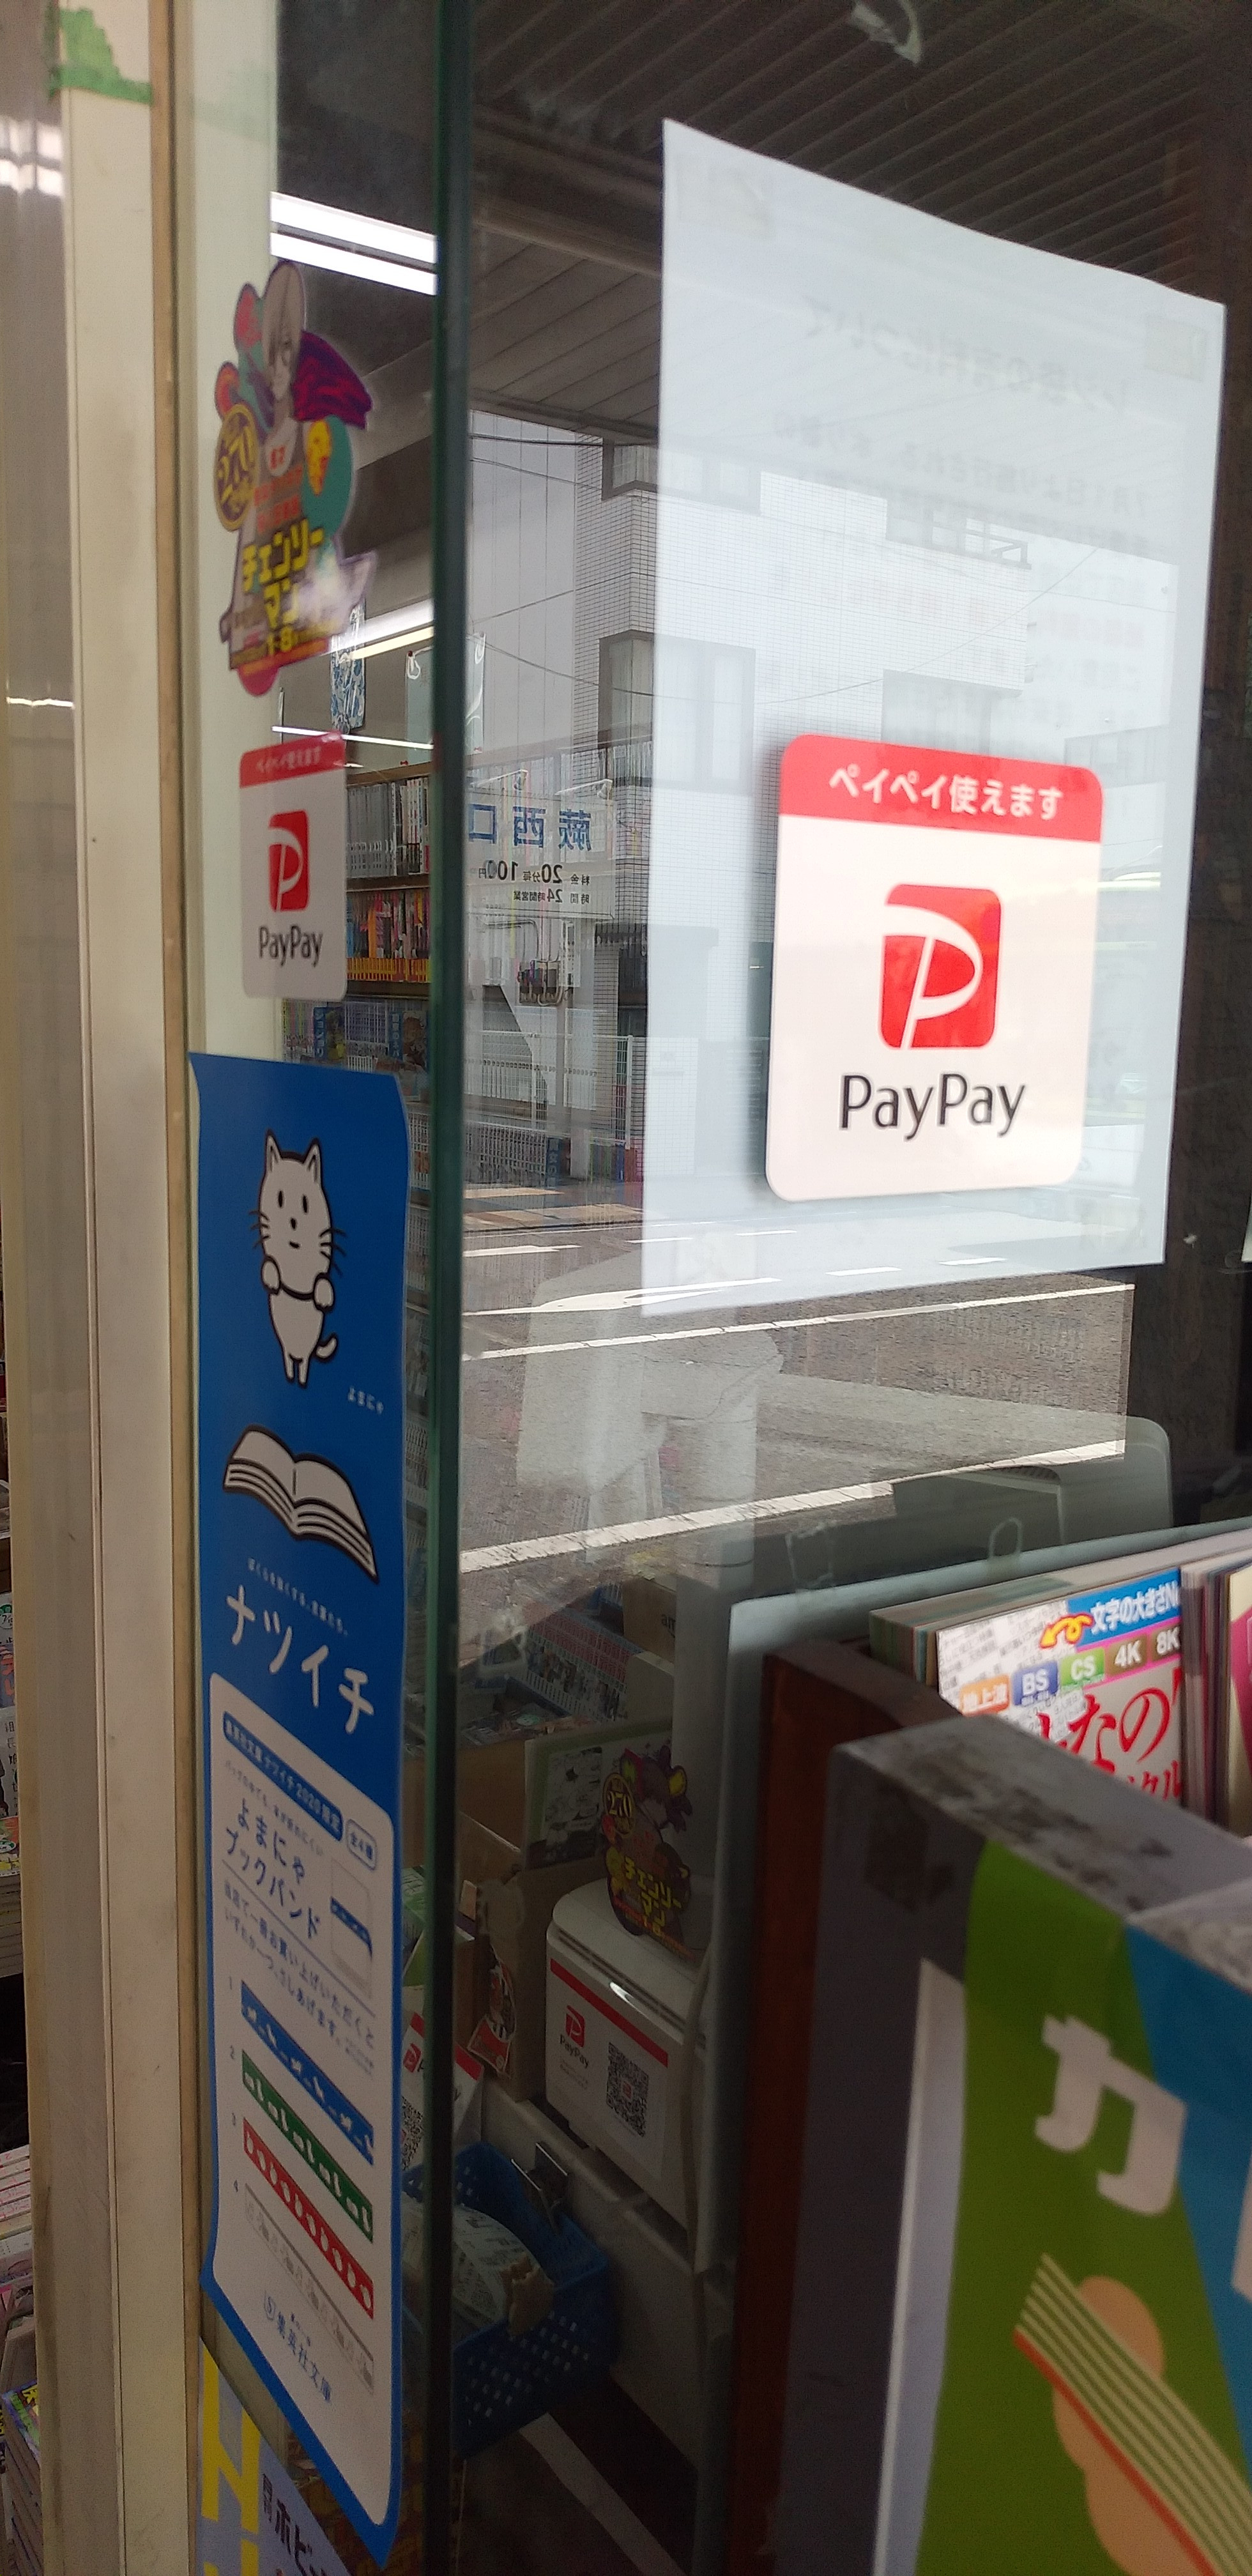 PayPay利用開始のお知らせ